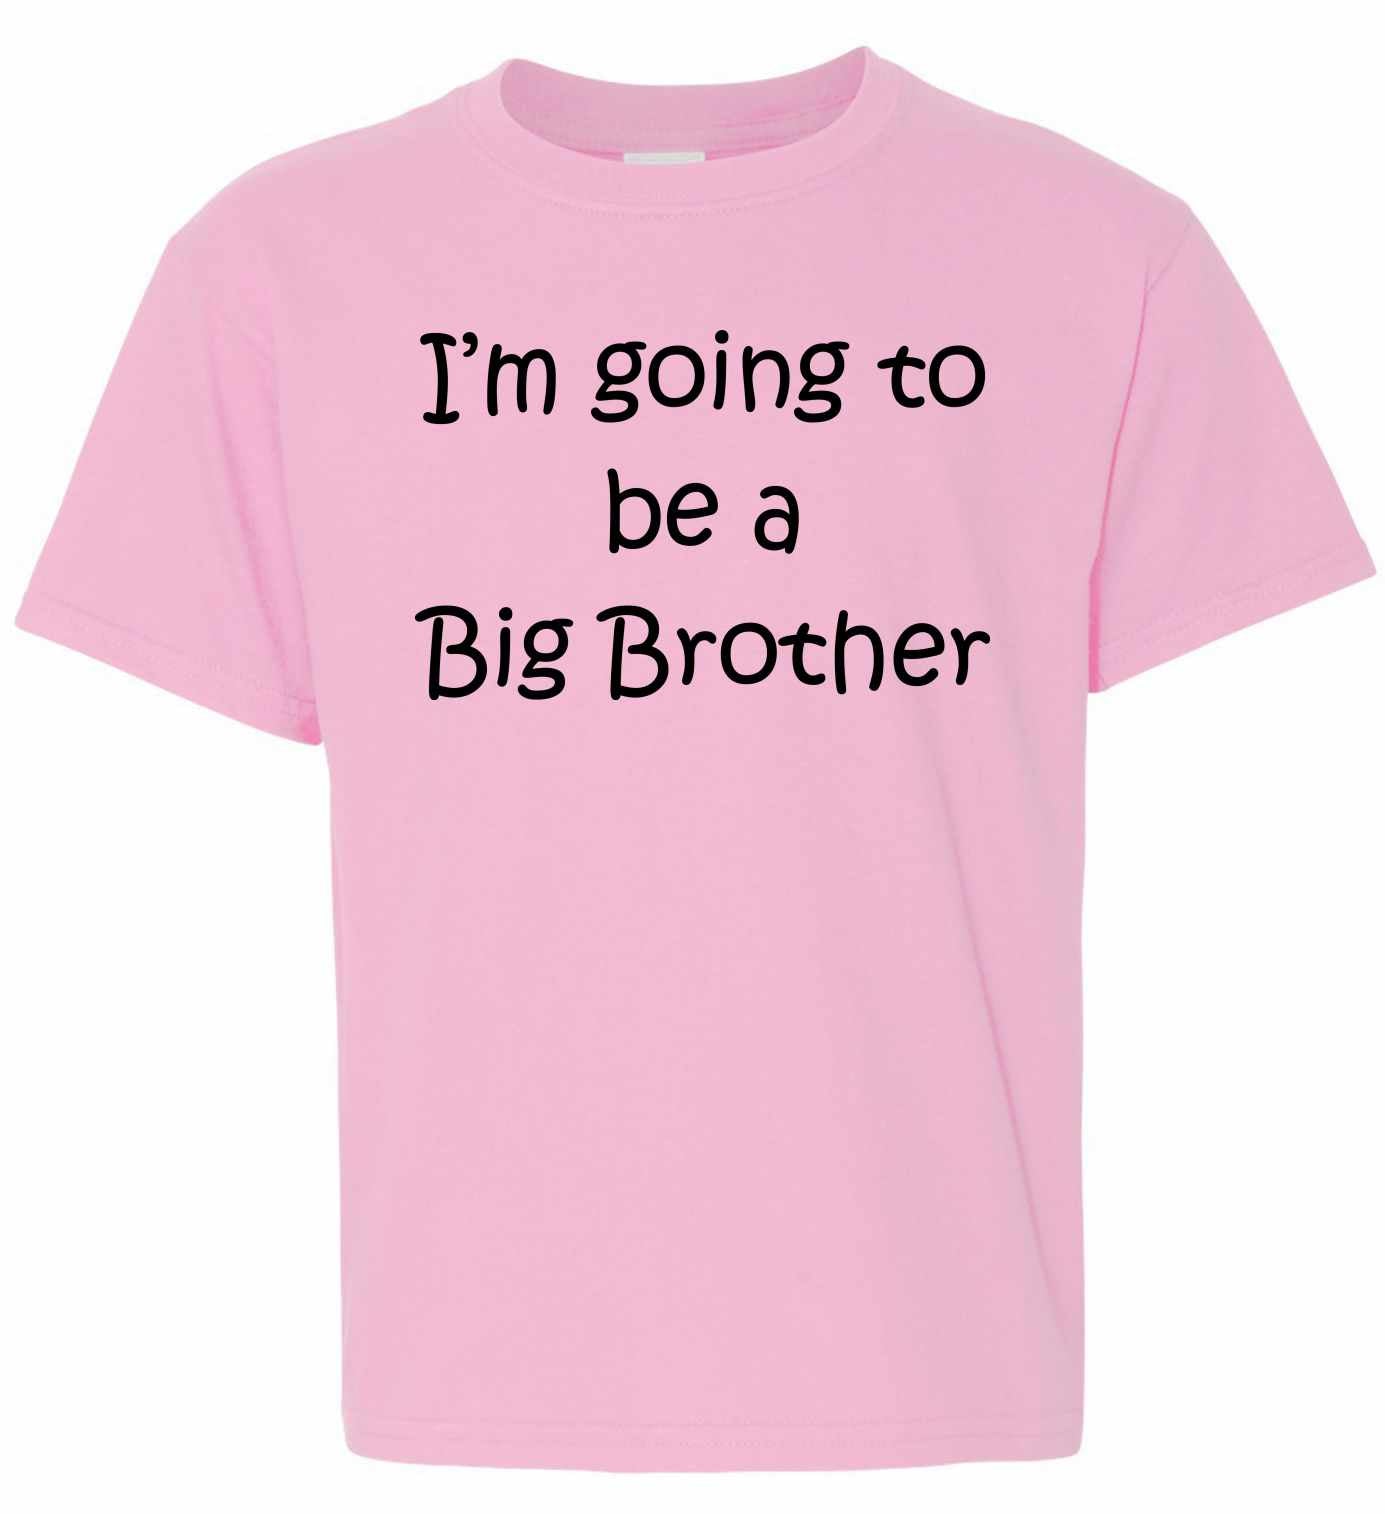 I'M GOING TO BE A BIG BROTHER on Kids T-Shirt (#517-201)